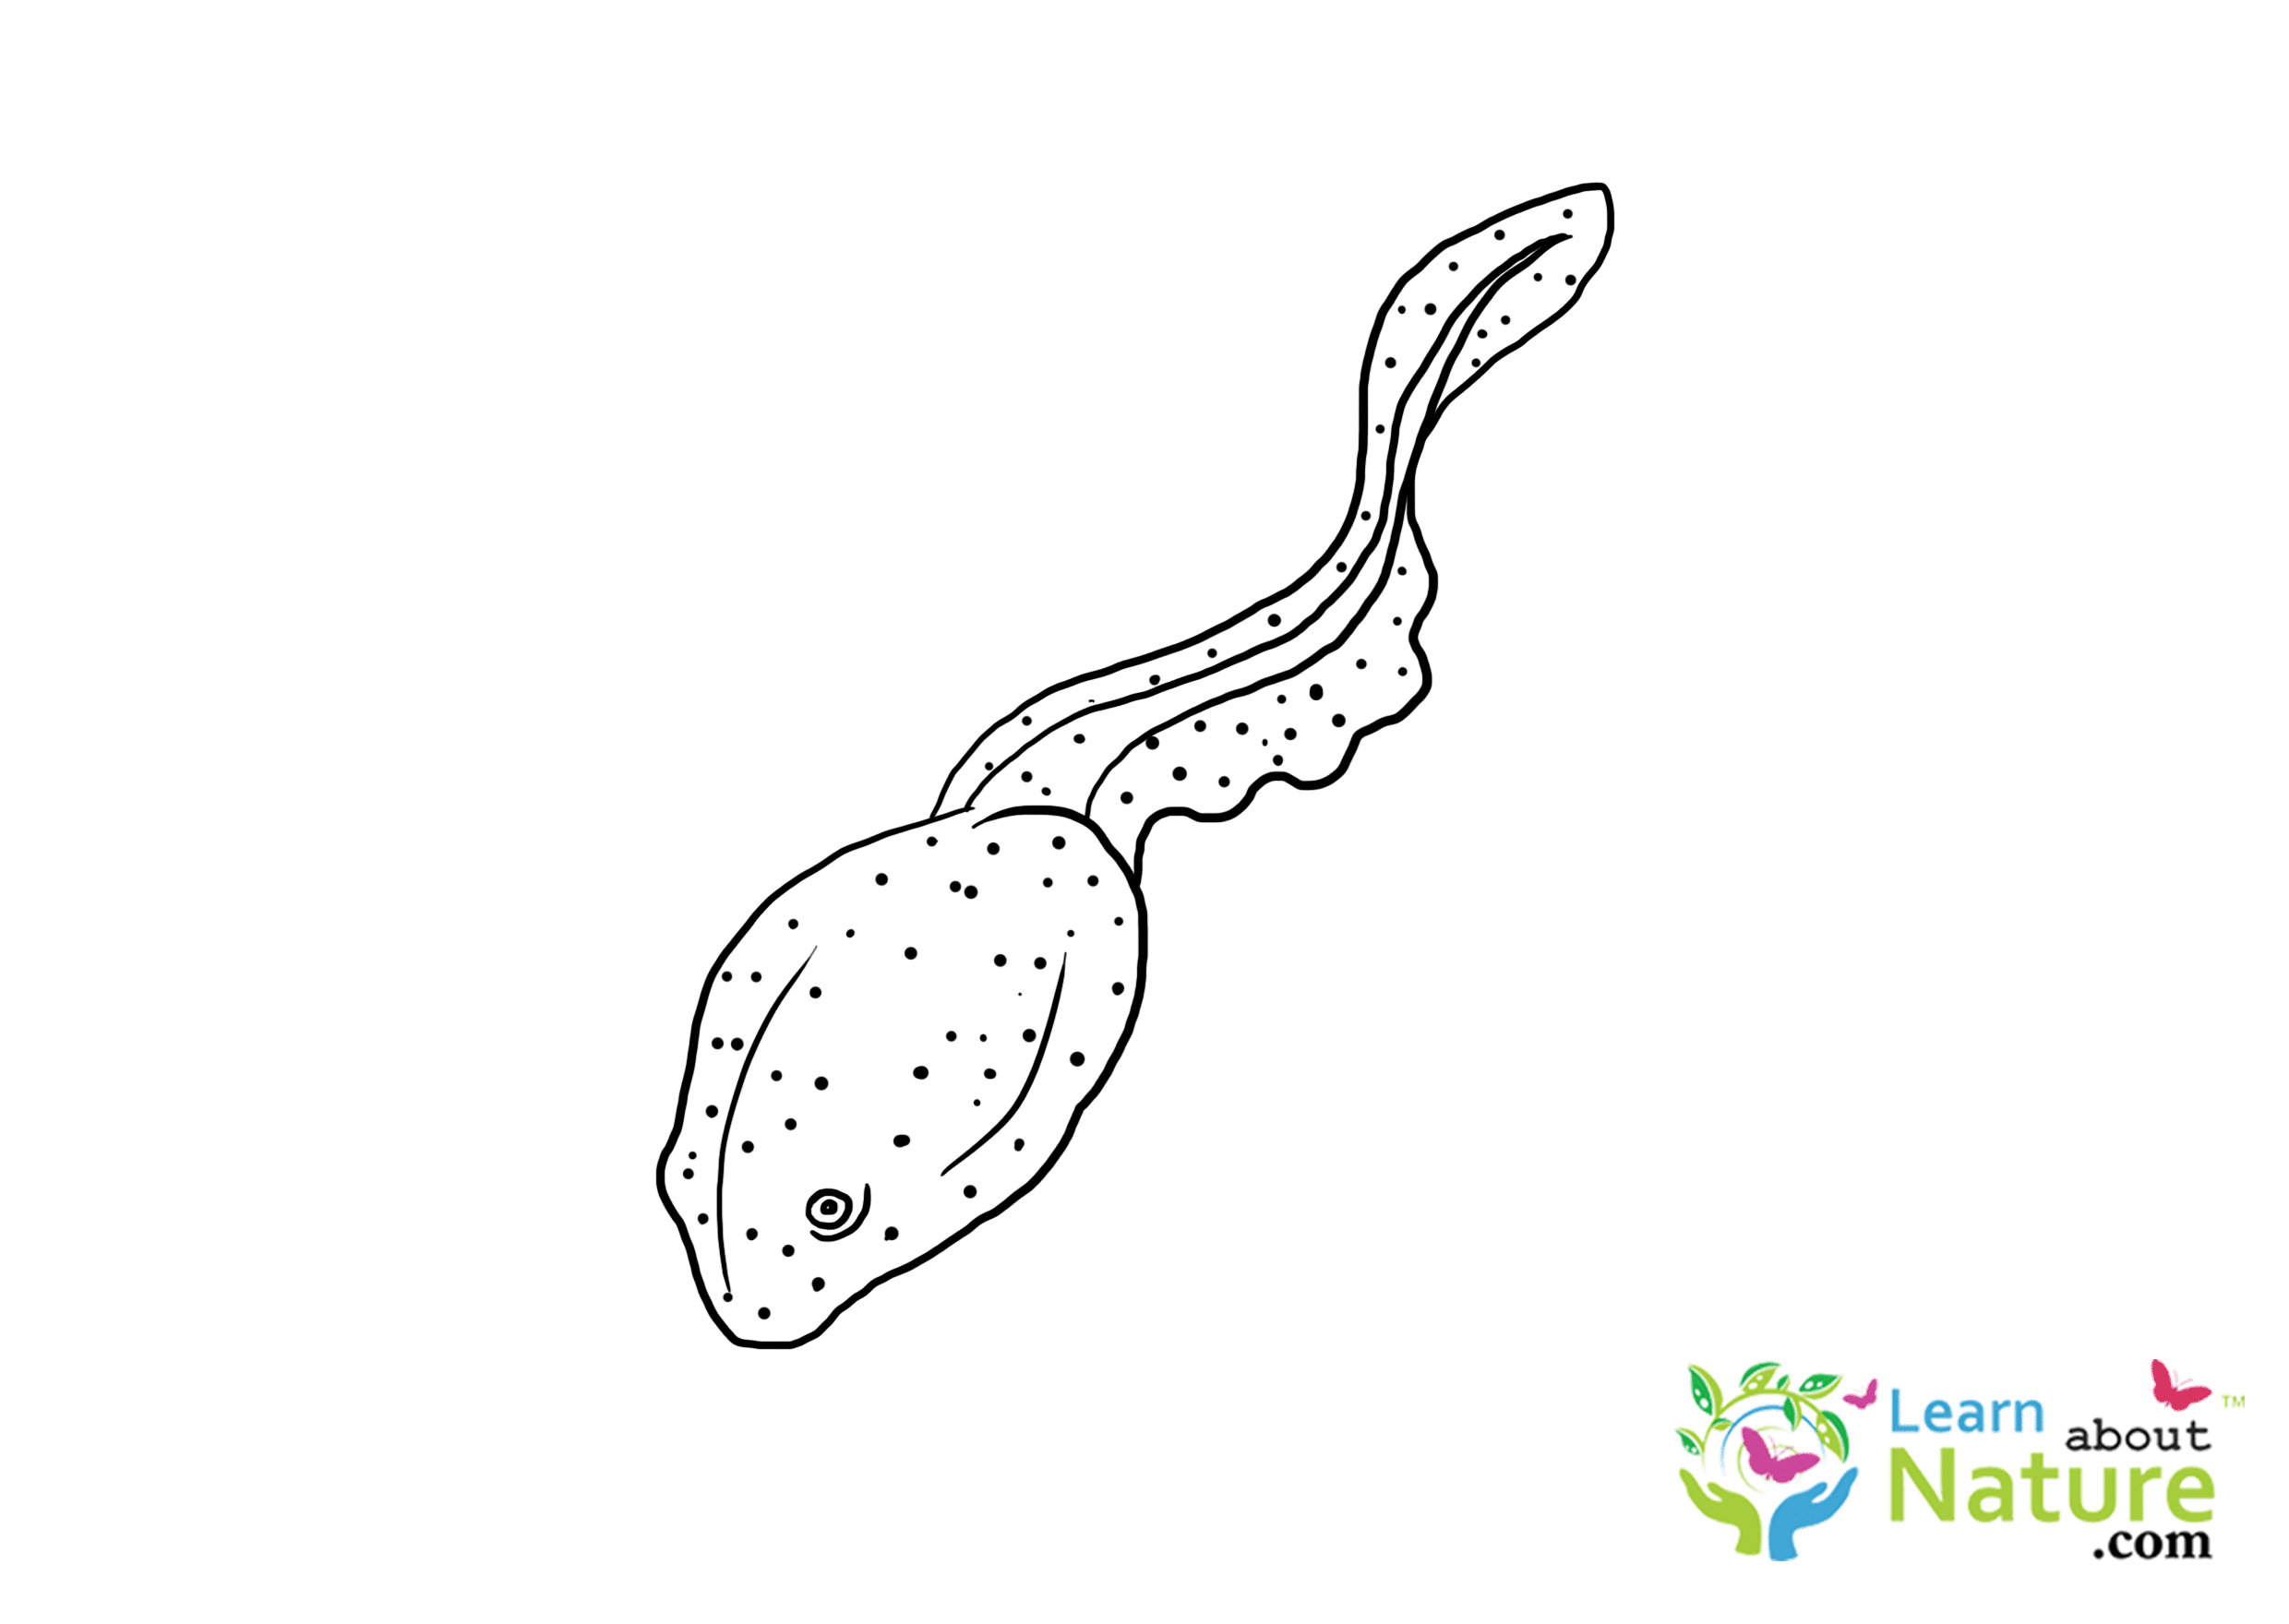 tadpole-coloring-page-10 - Learn About Nature